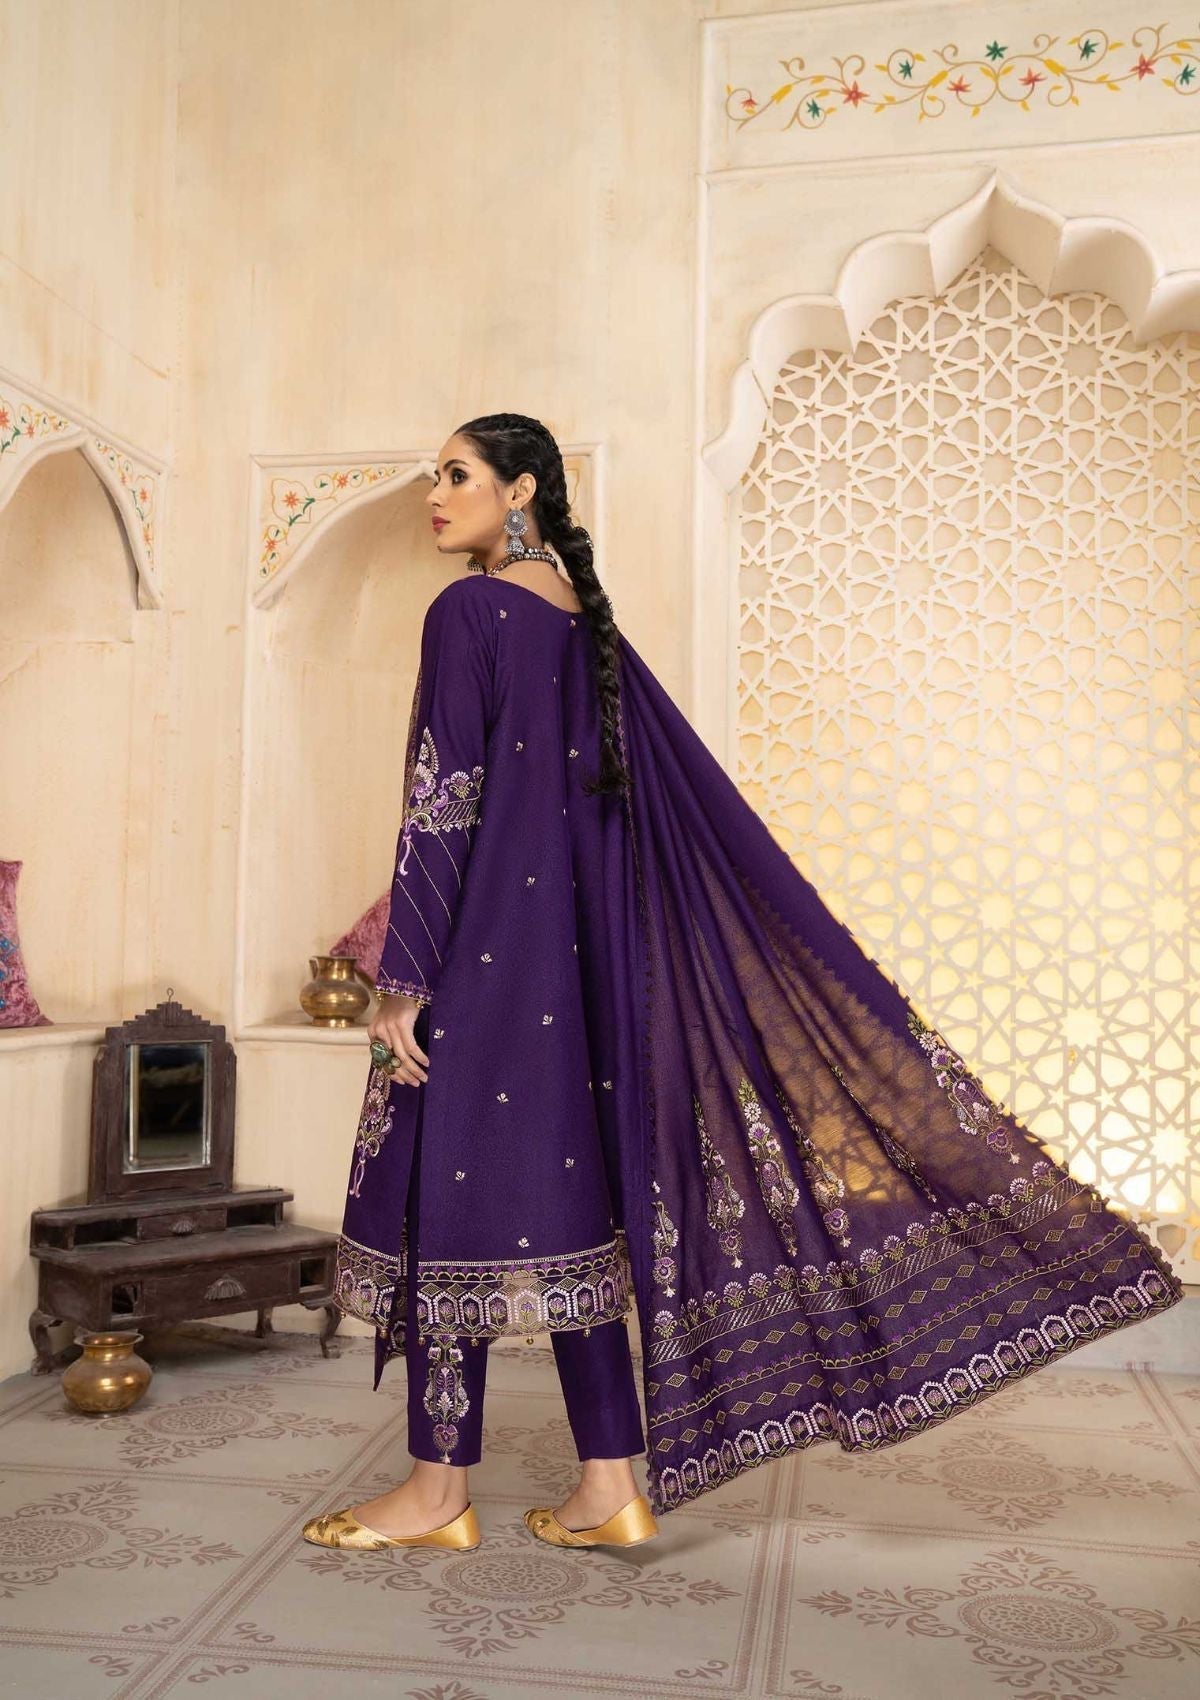 Winter Collection - Anamta - Dans Le Imperial - D#1 available at Saleem Fabrics Traditions